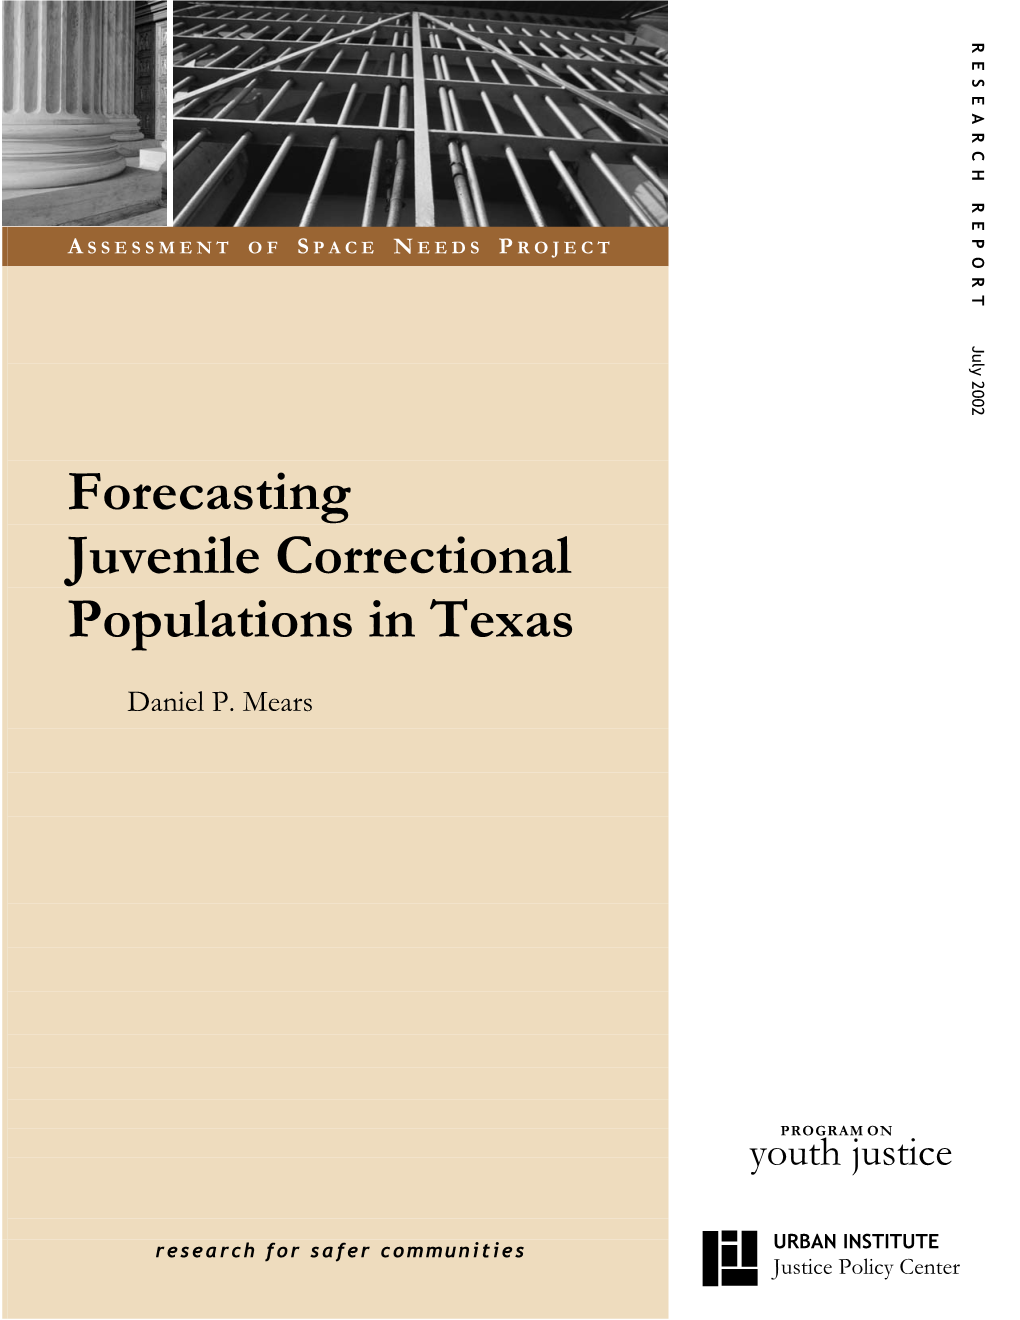 Forecasting Juvenile Correctional Populations in Texas